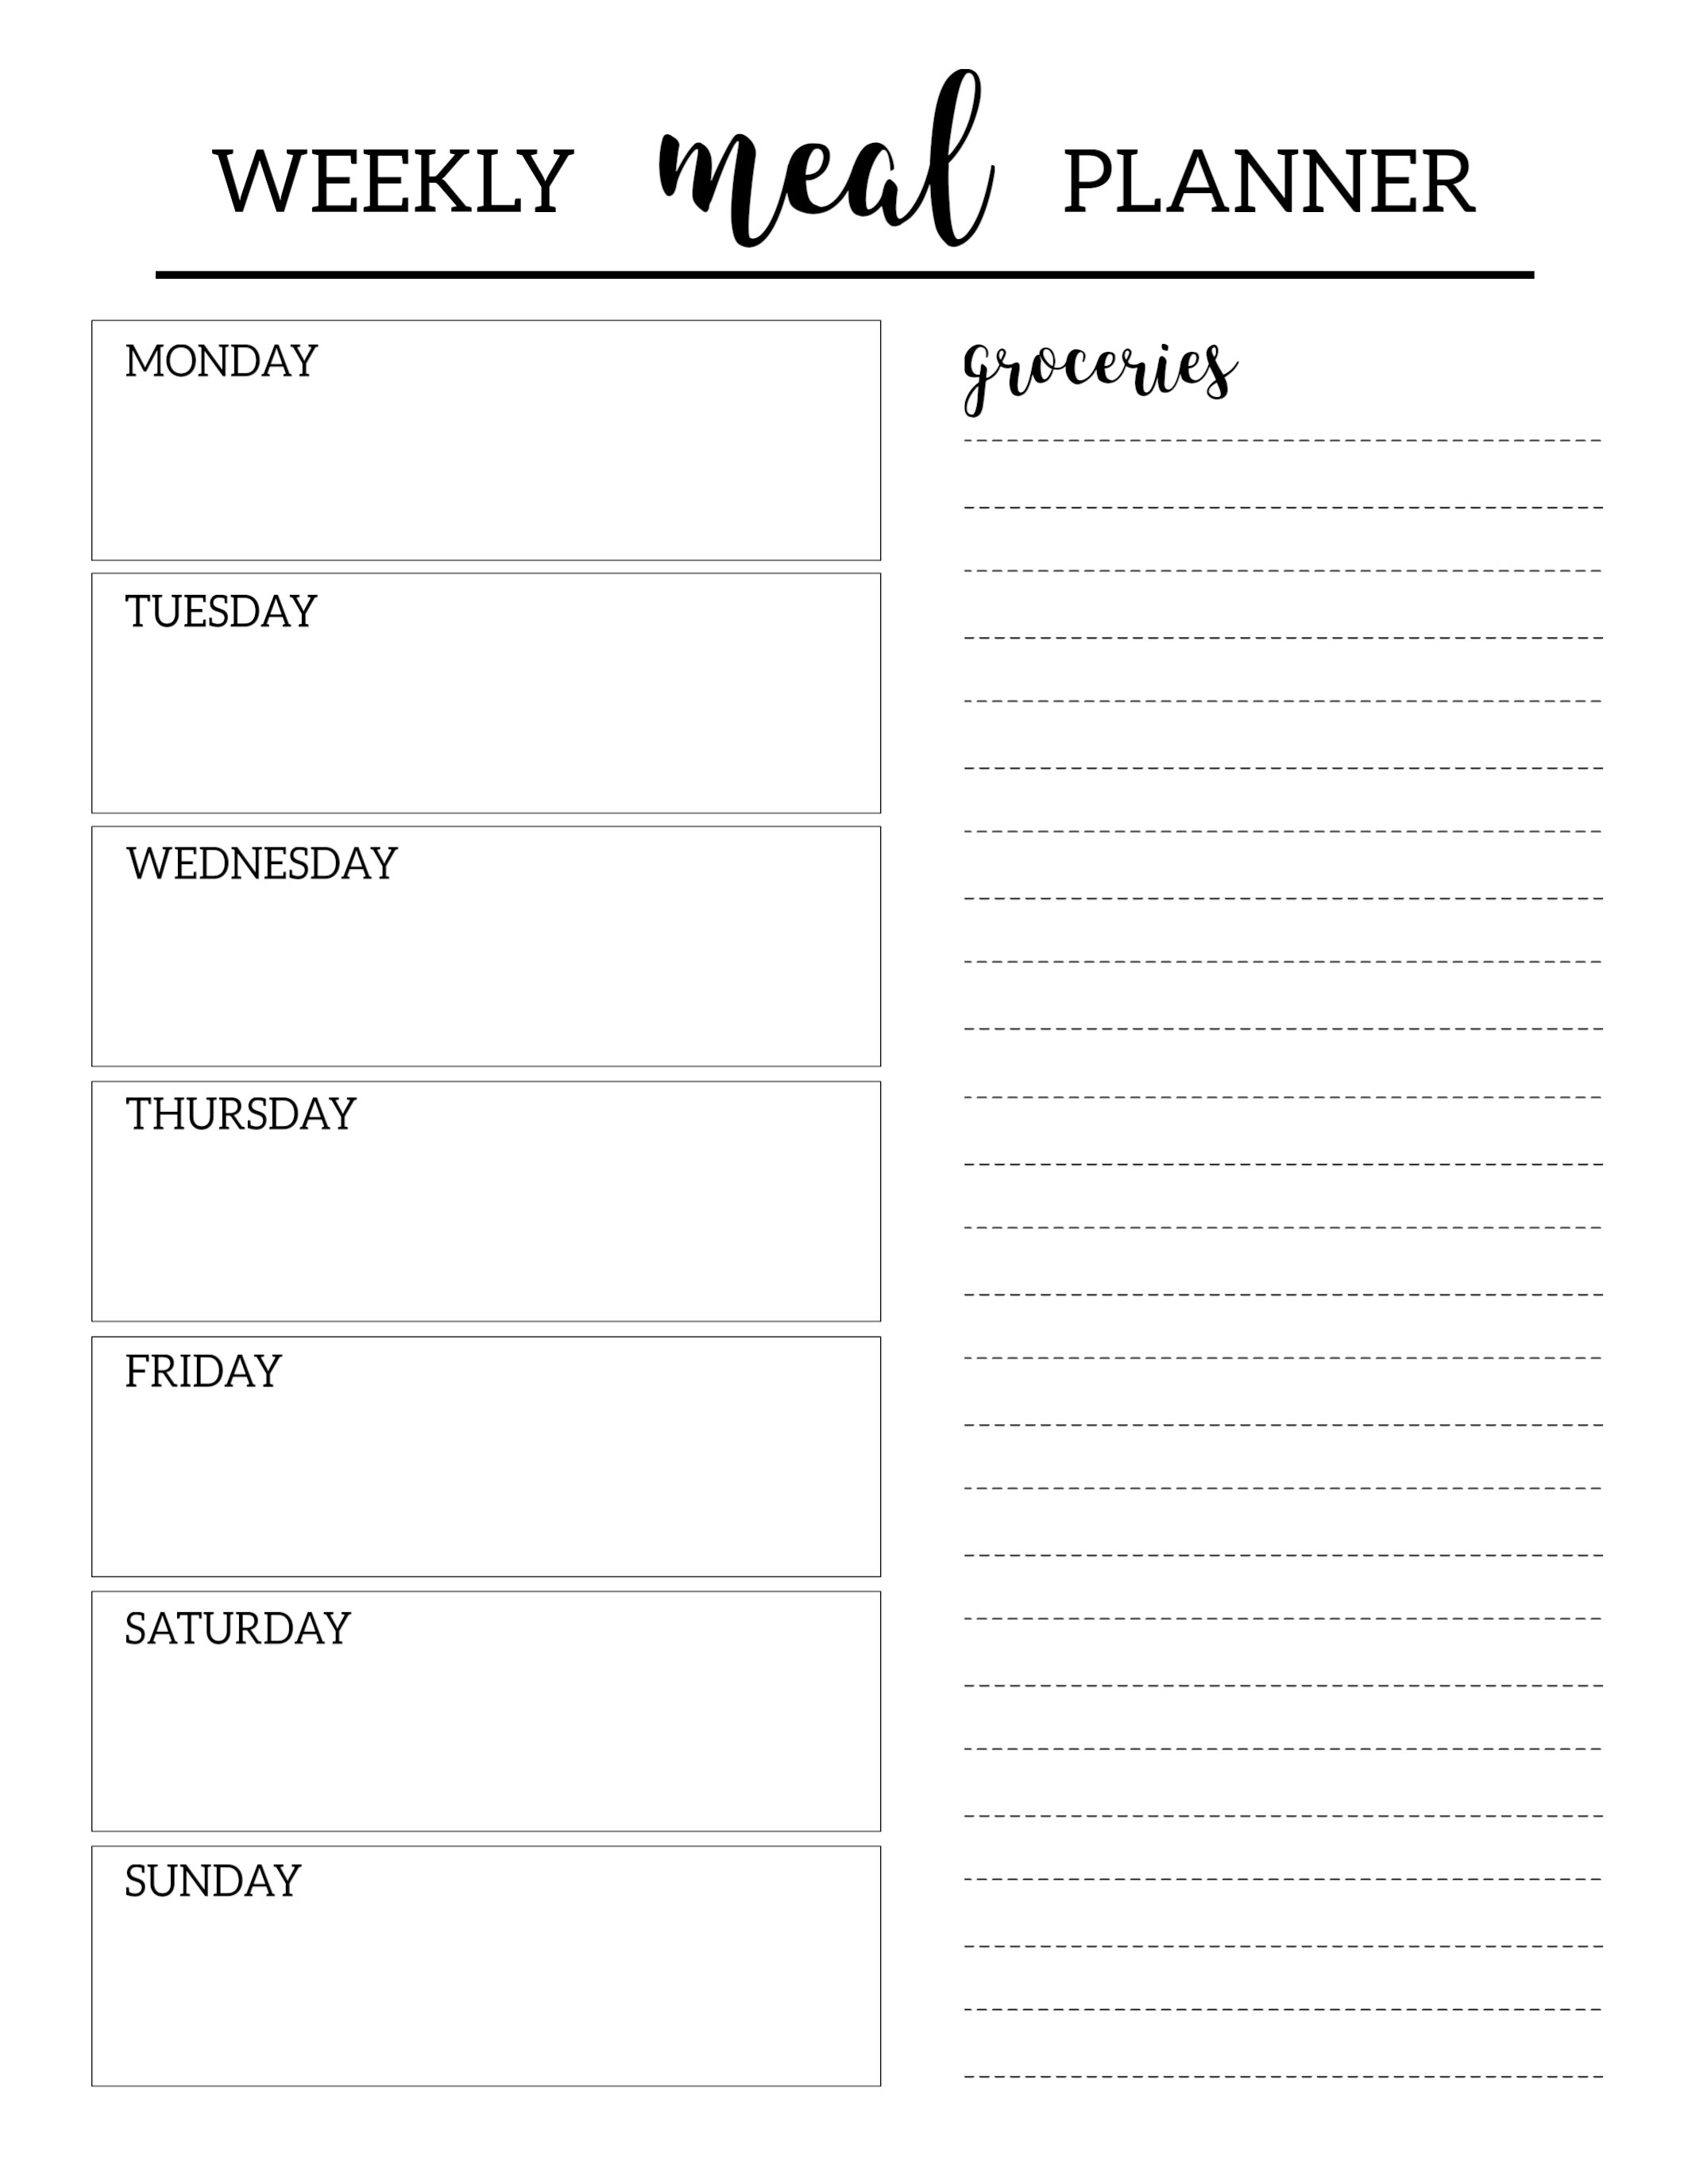 Free Printable Shopping List And Meal Planner - 9.8.kaartenstemp.nl • - Free Printable Grocery List And Meal Planner